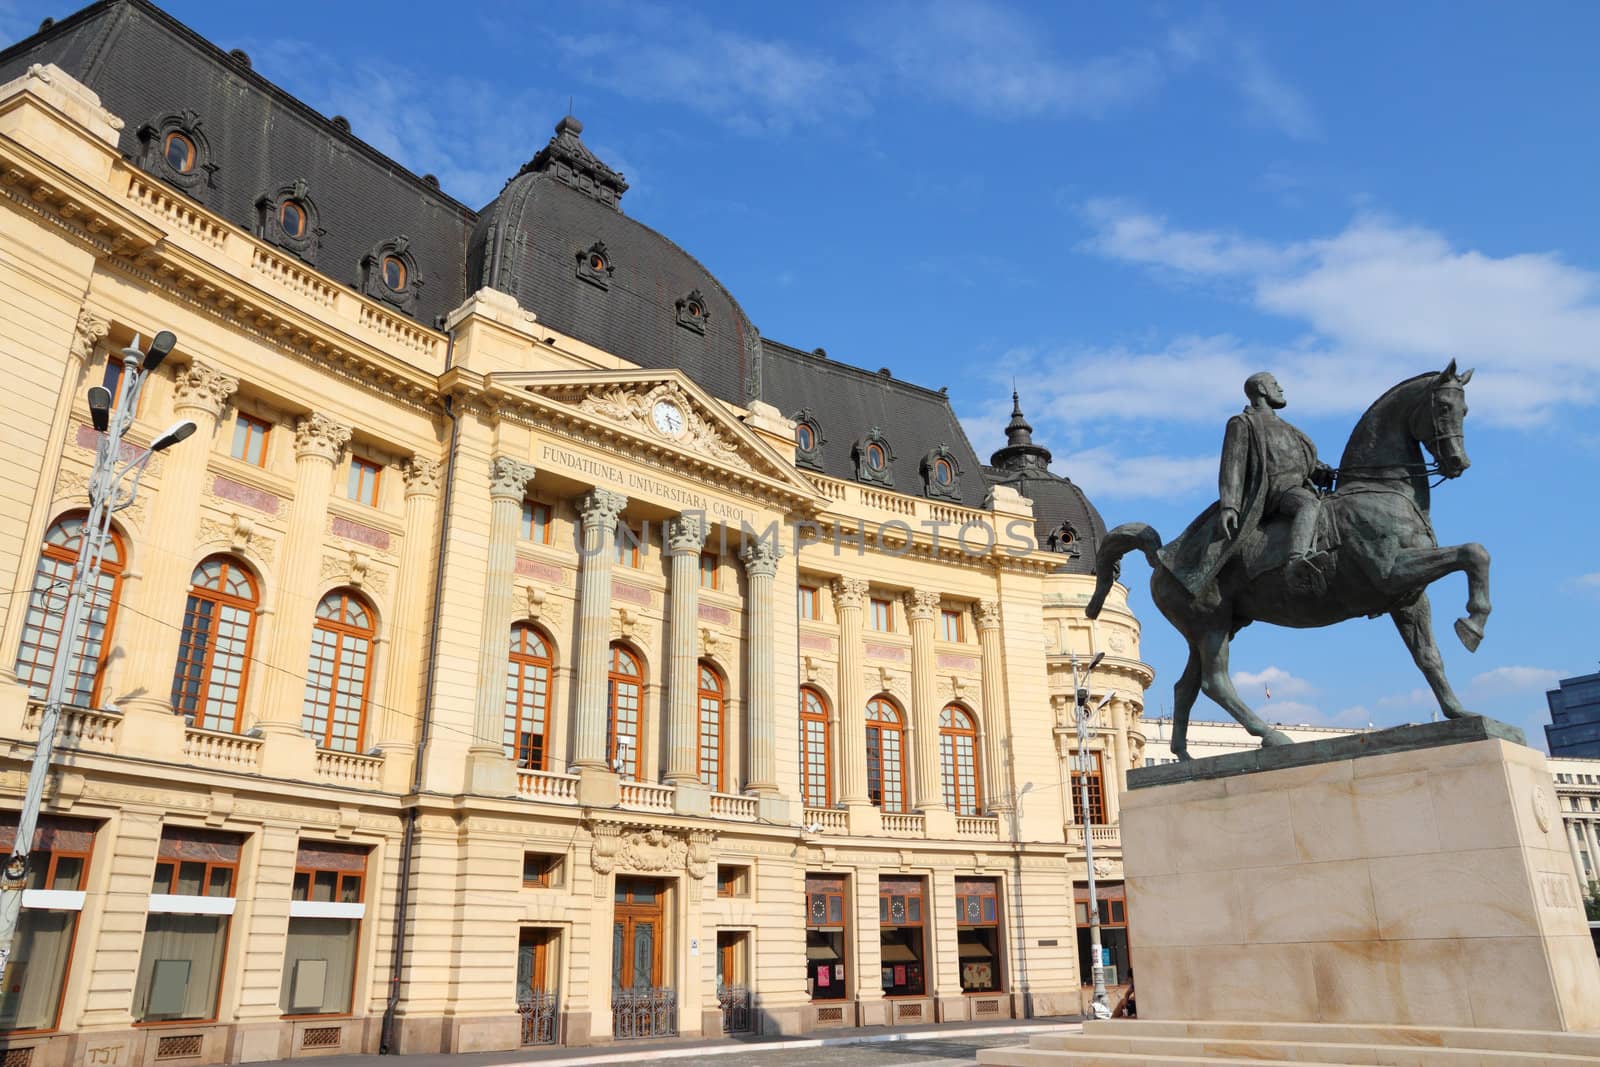 Bucharest, capital city of Romania. Central University Library and statue of king Carol I of Romania.